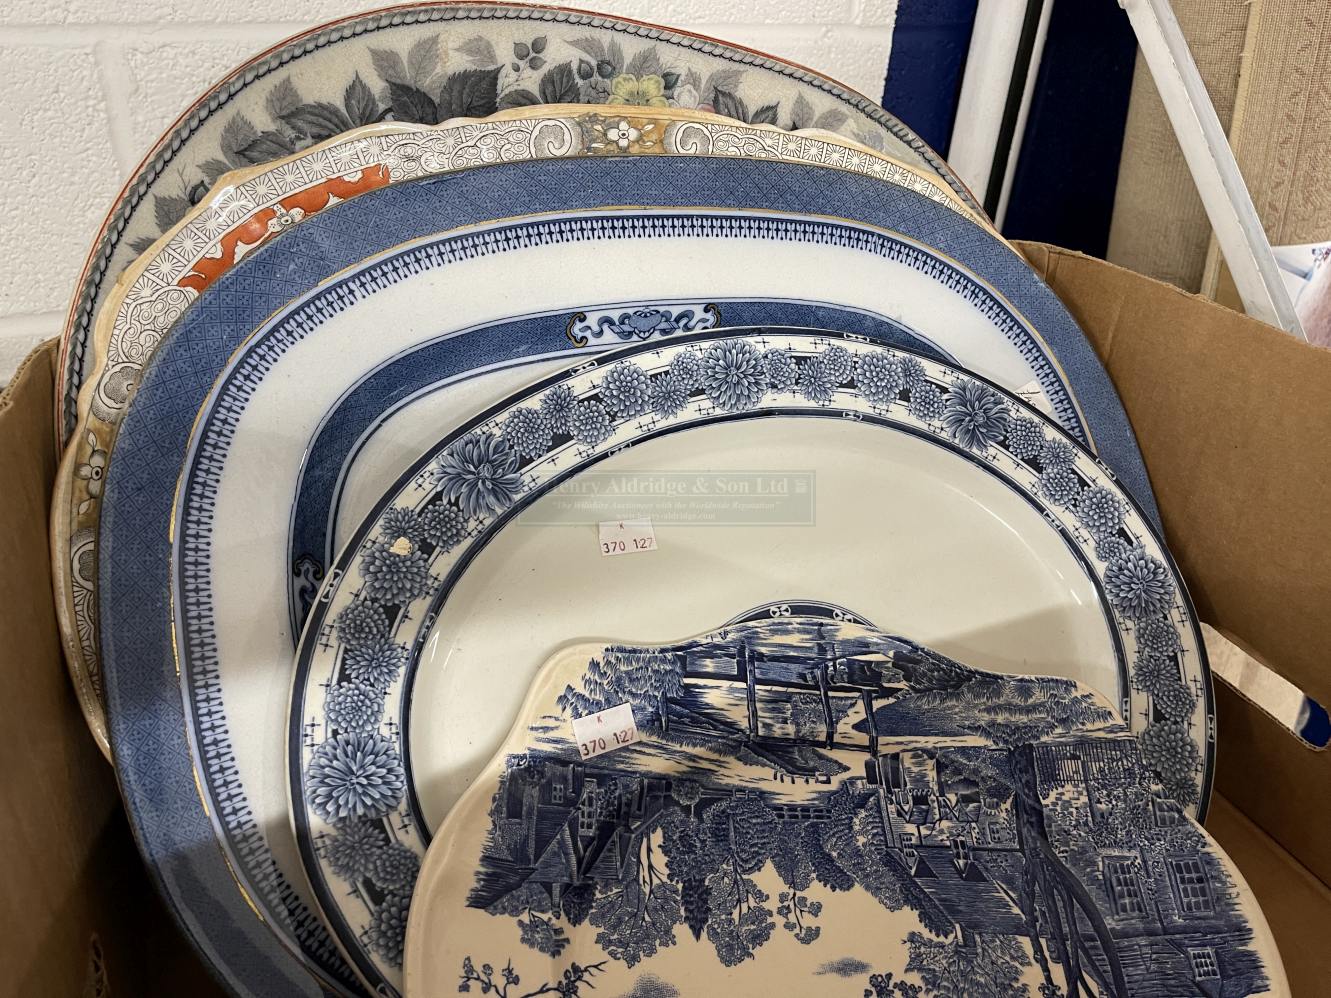 19th cent. Pottery: Meat plates blue/white willow plates x 2, blue/white Indian pattern plate,